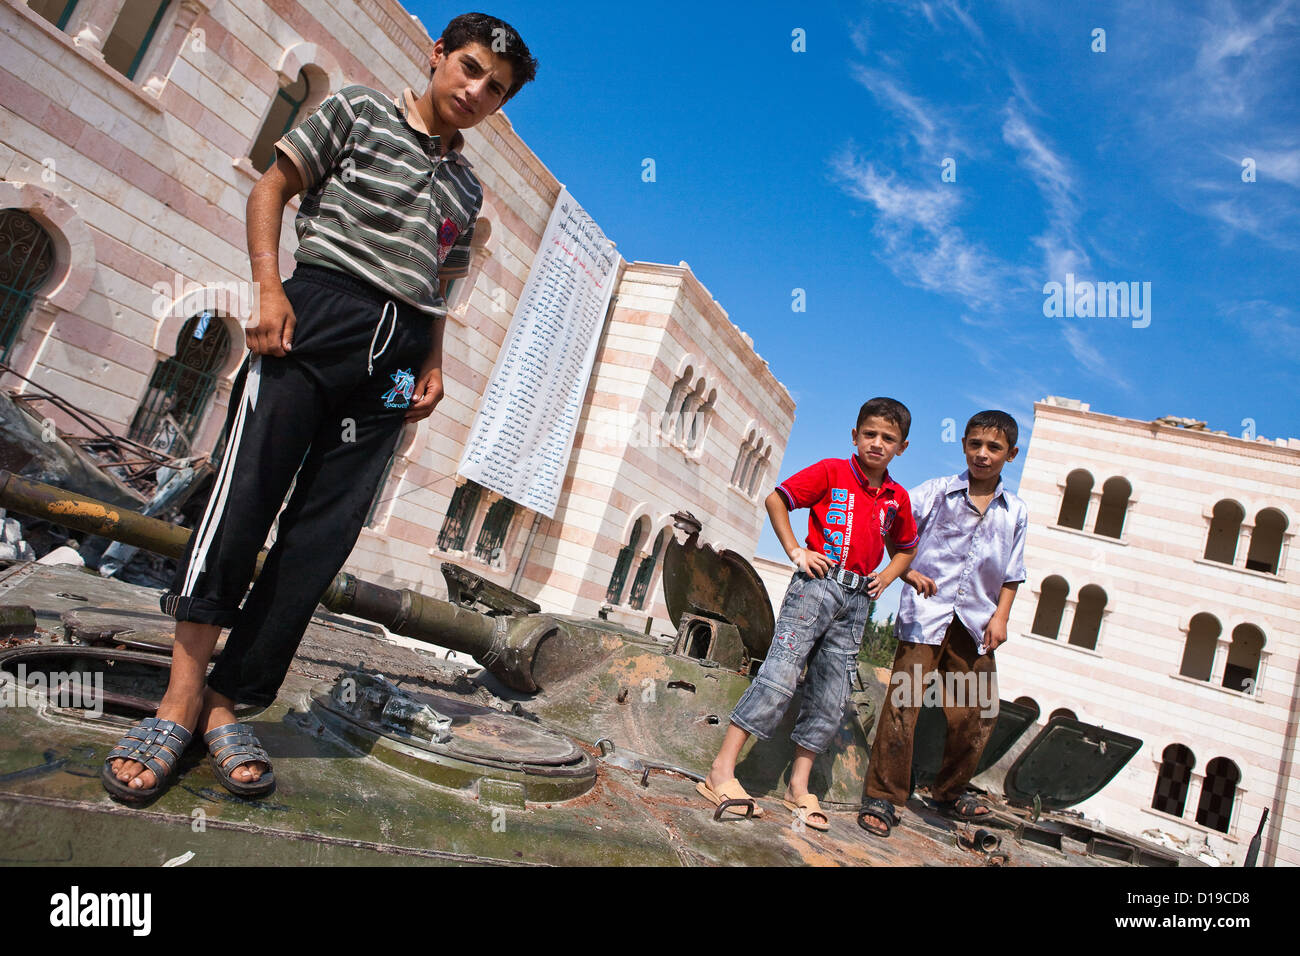 Azaz, Syria, 5/10/12. Kids on top of a disabled tank outside the damaged mosque in Azaz. Banner in background names martyrs. Stock Photo